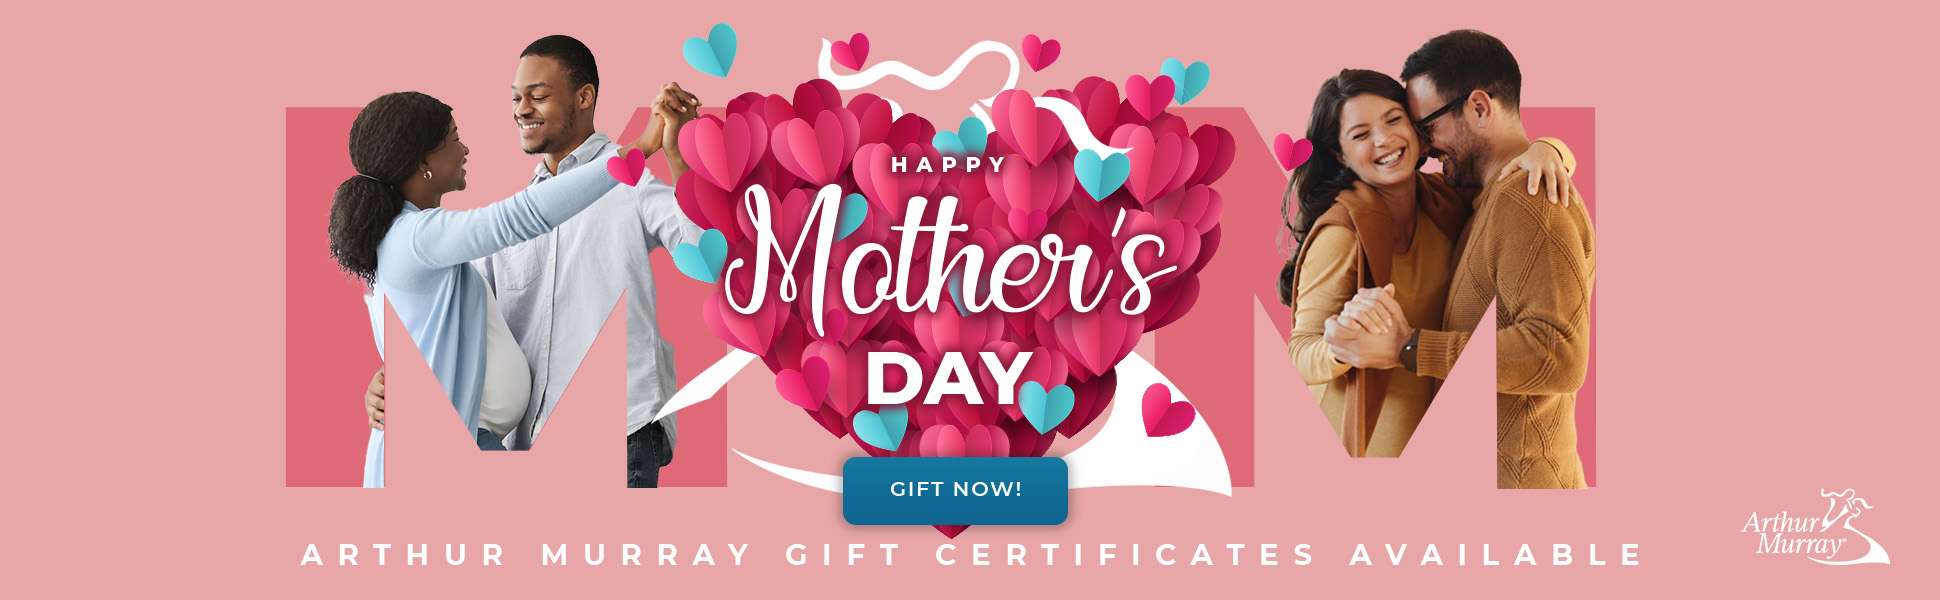 Mother's Day Arthur Murray Gift Certificates Available